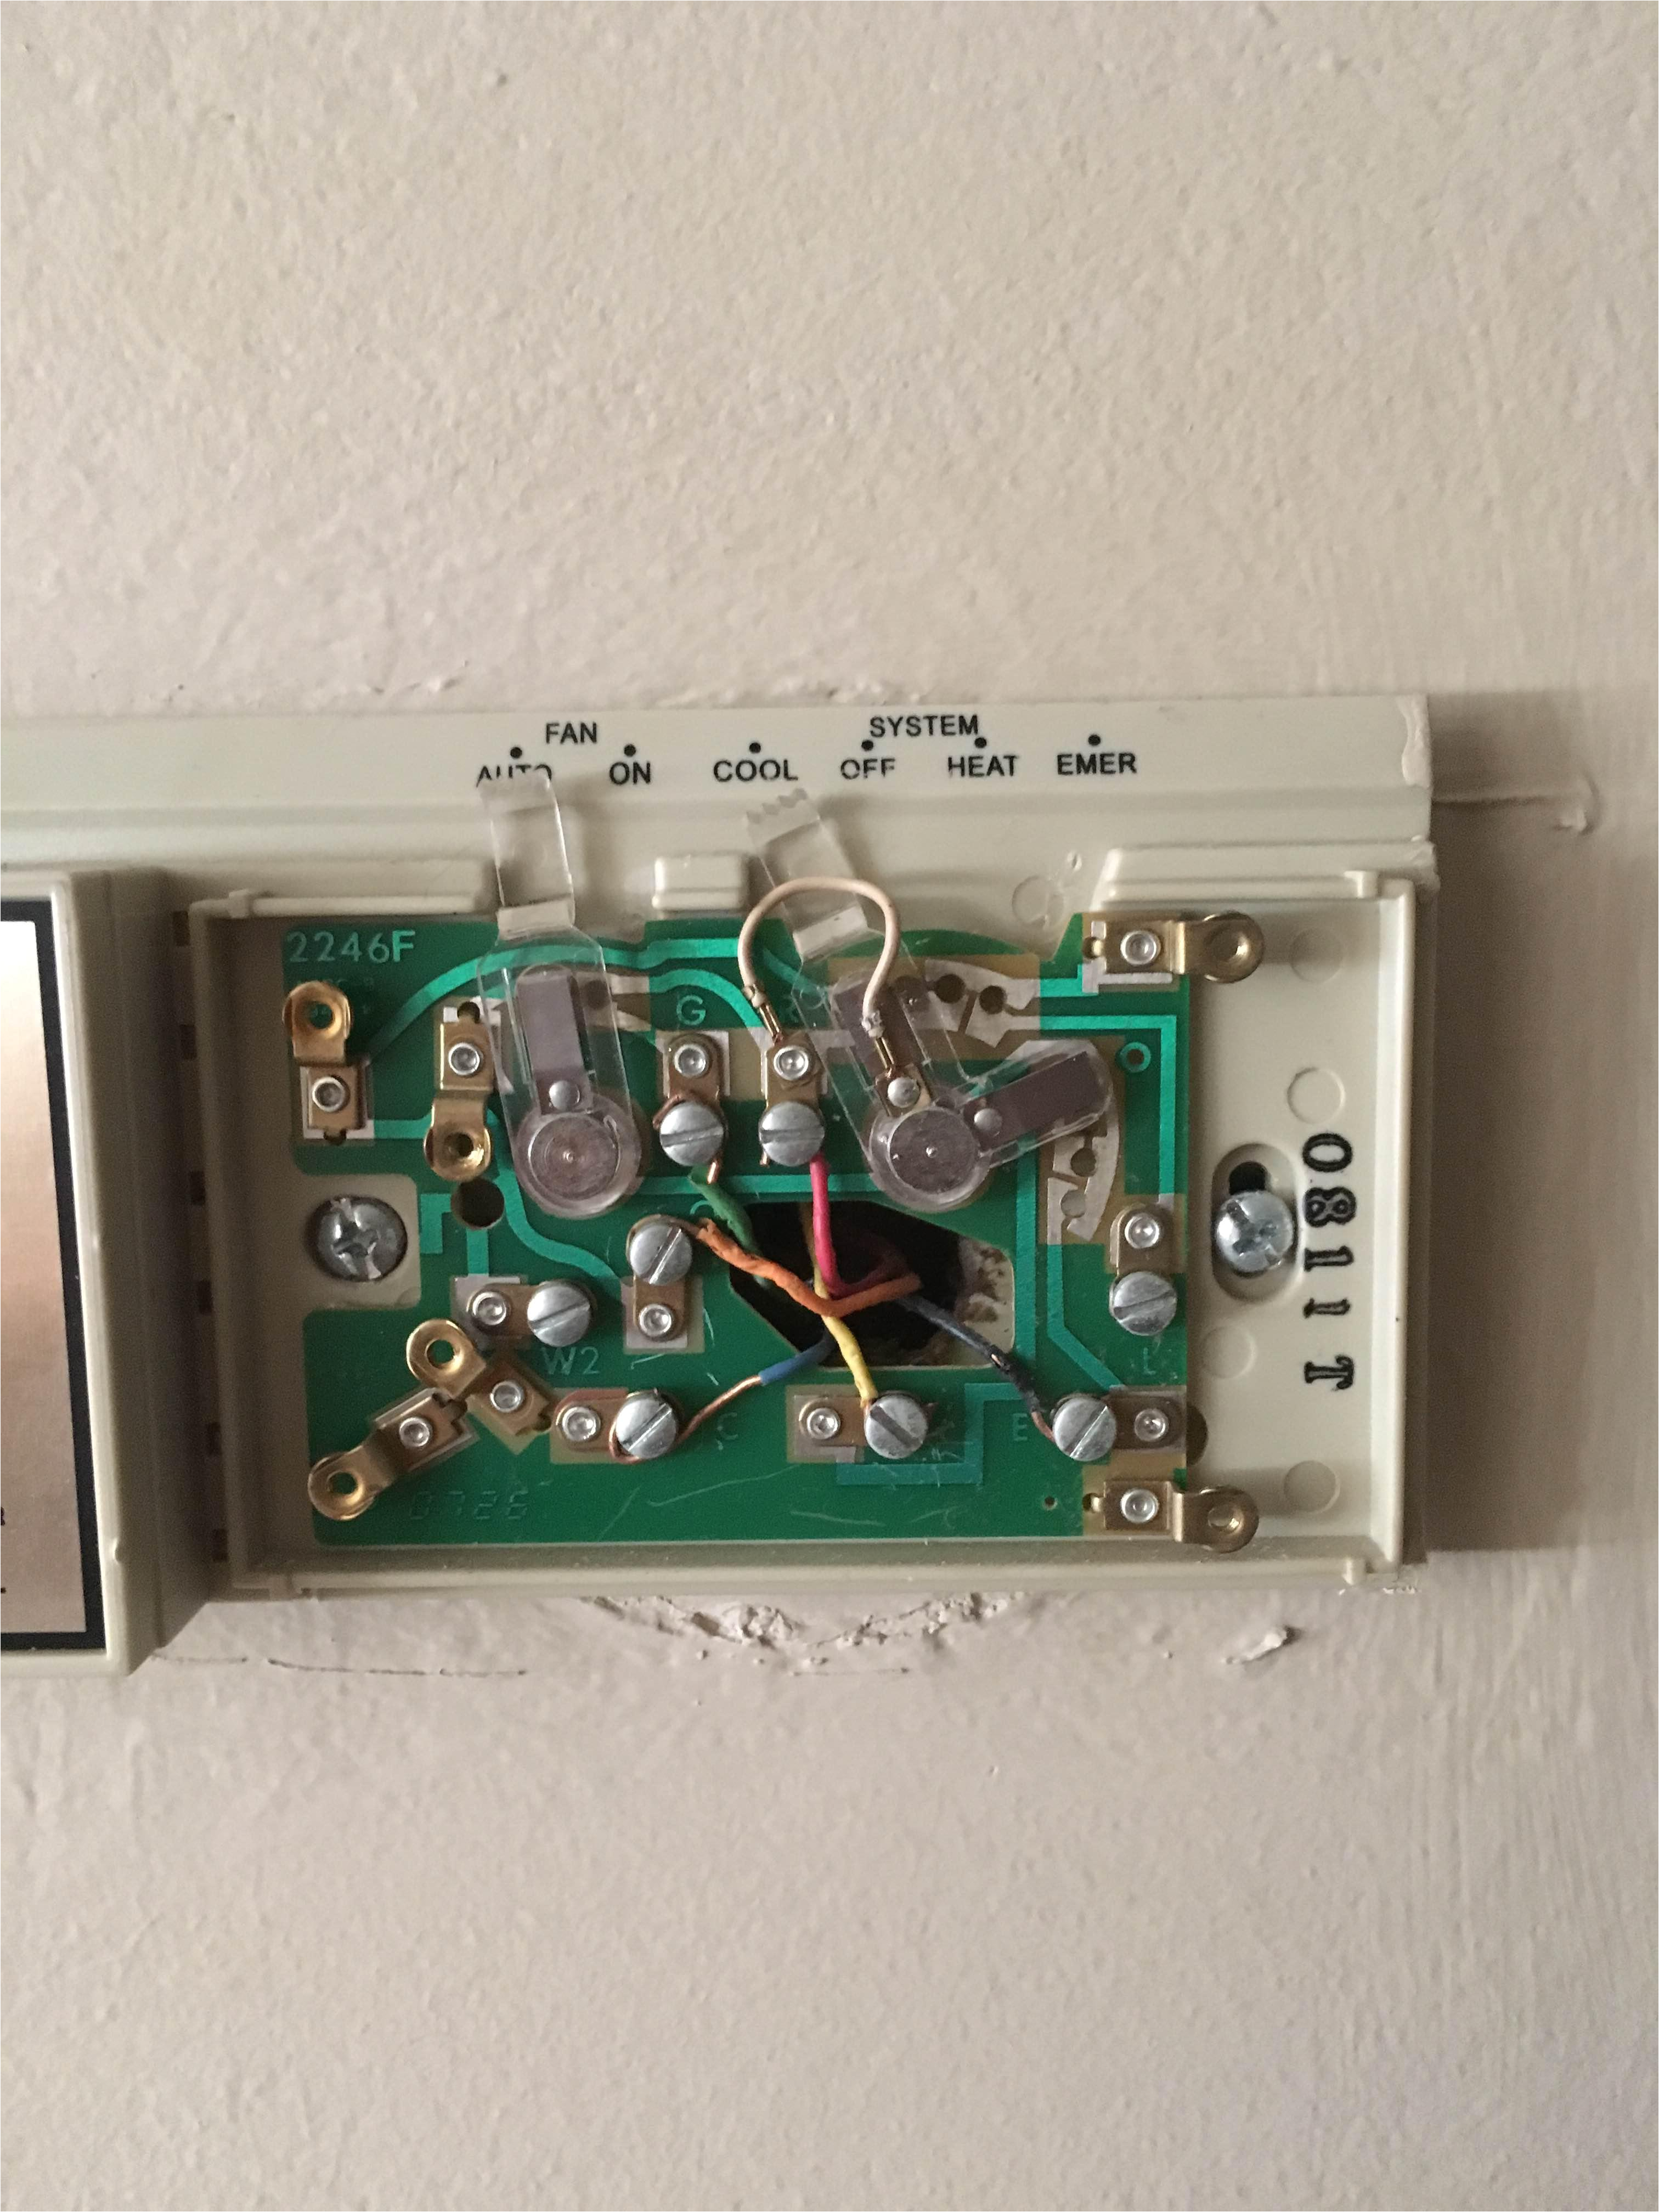 White Rodgers 1f86 344 Wiring Diagram White Rodgers thermostat Wiring Extended Wiring Diagram